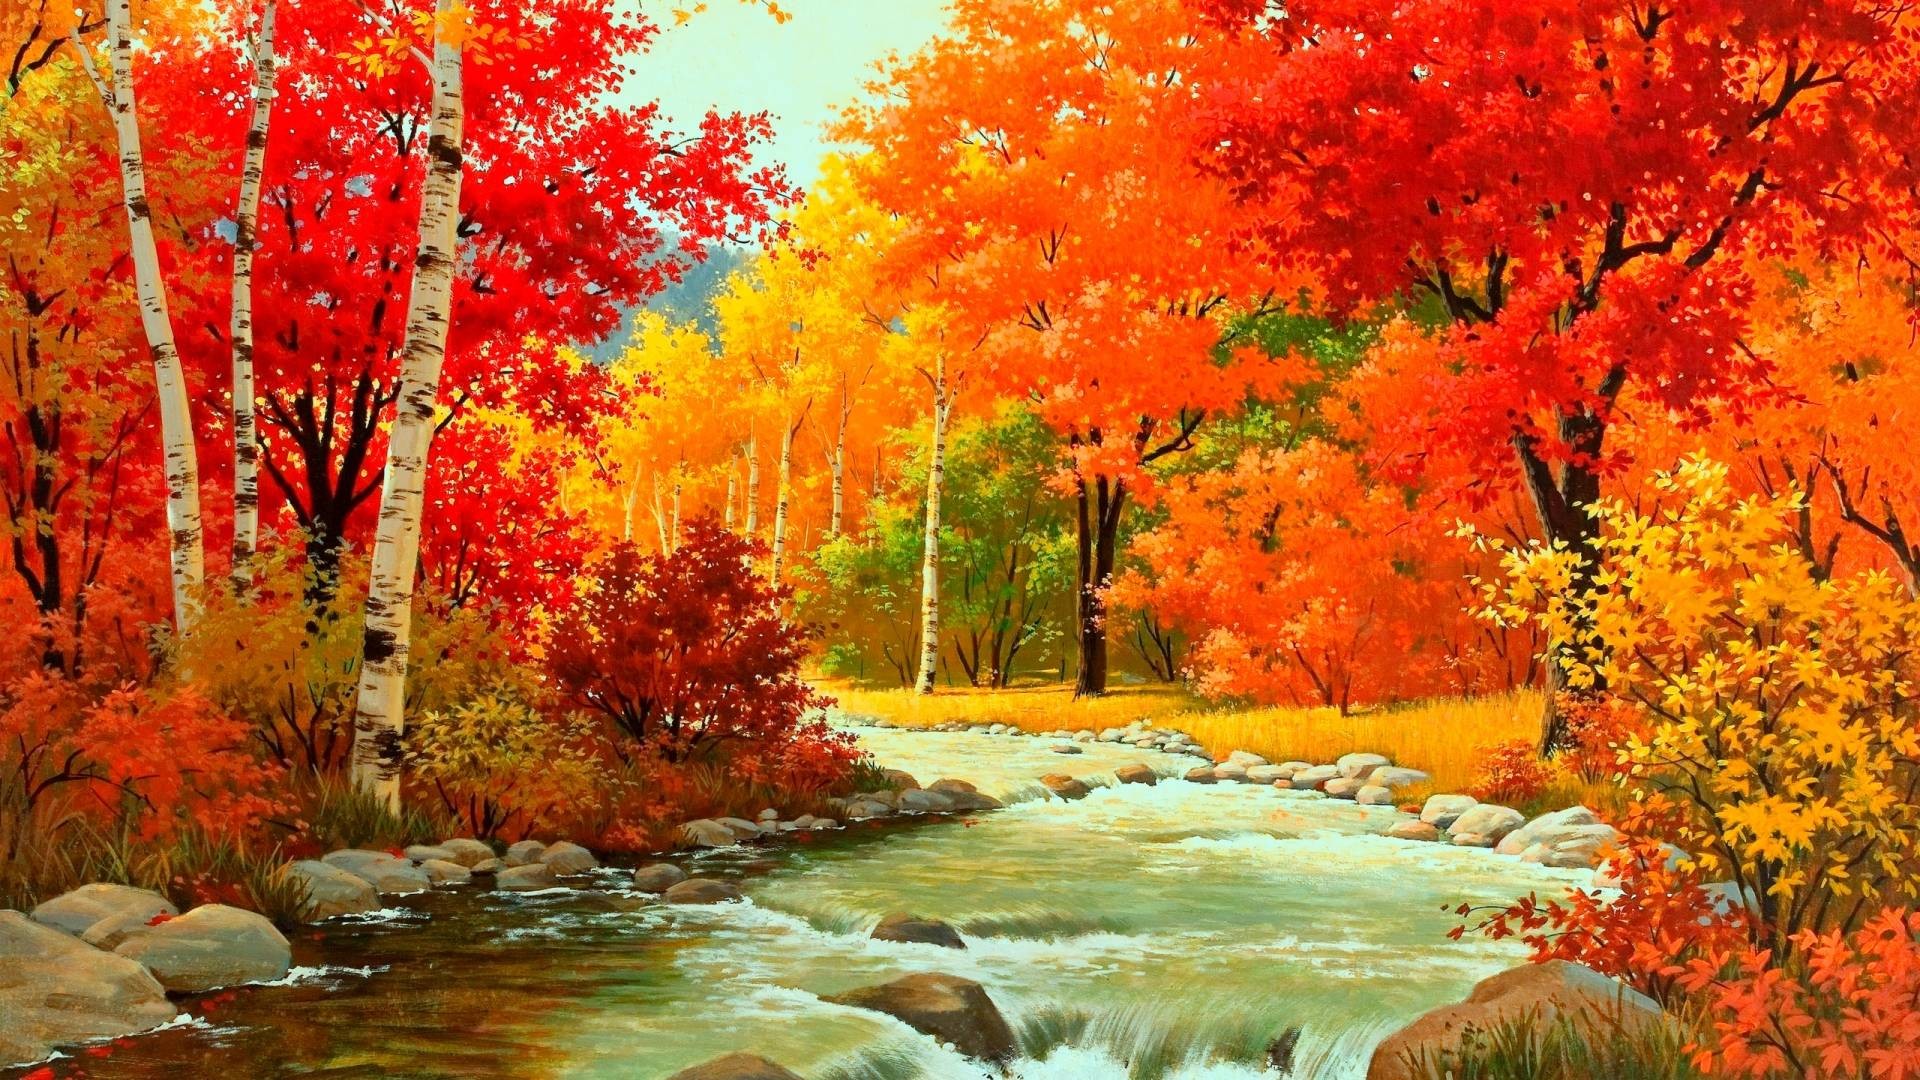 1920x1080 Autumn 1080p Pictures - HD Wallpapers